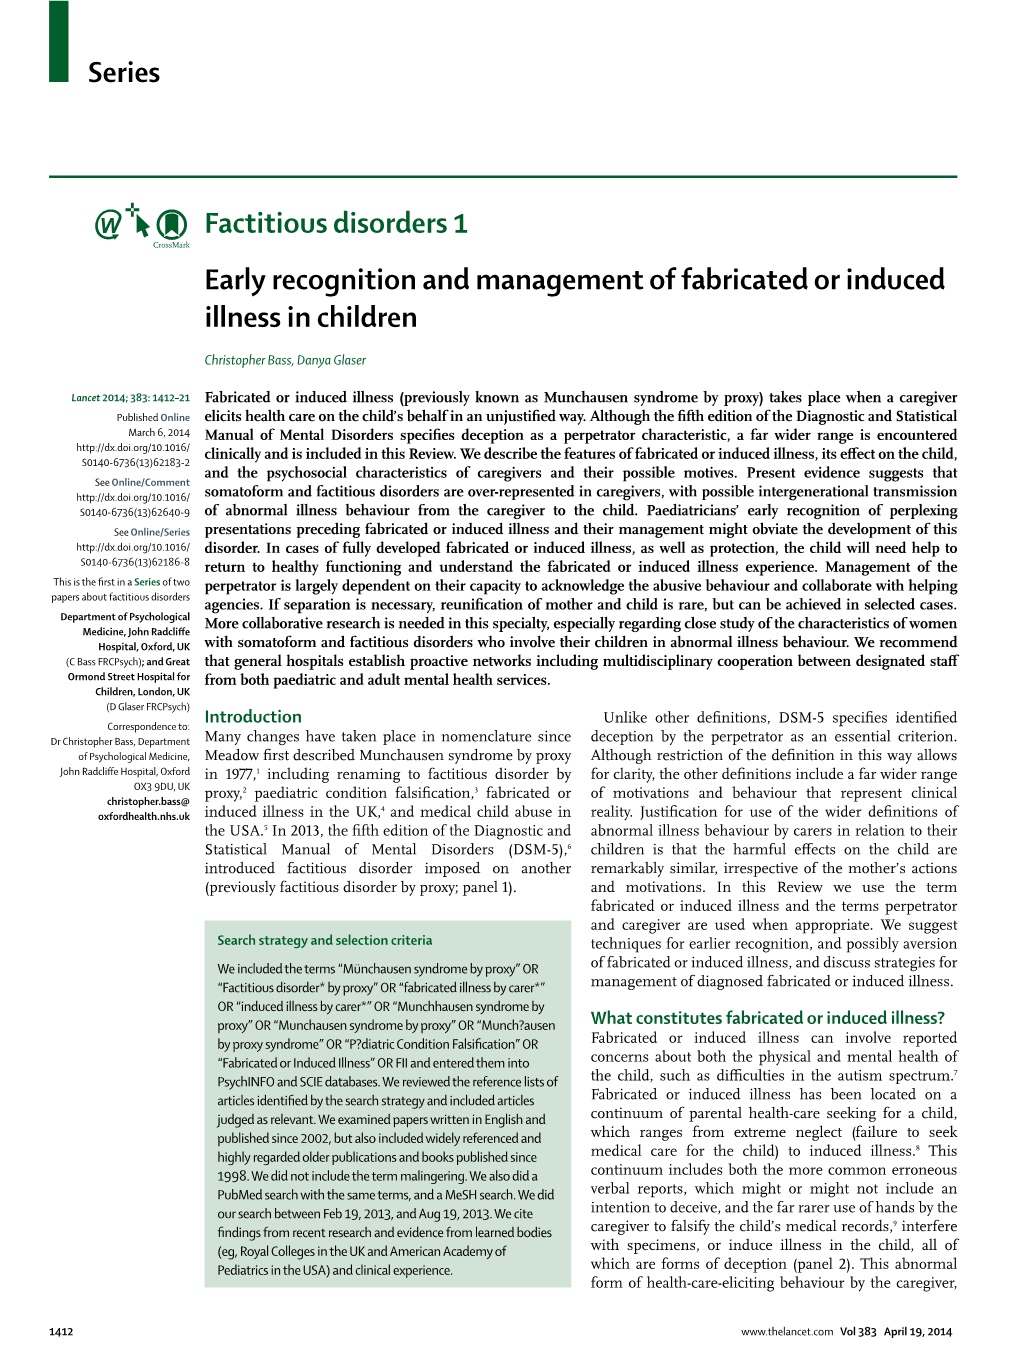 Early Recognition and Management of Fabricated Or Induced Illness in Children